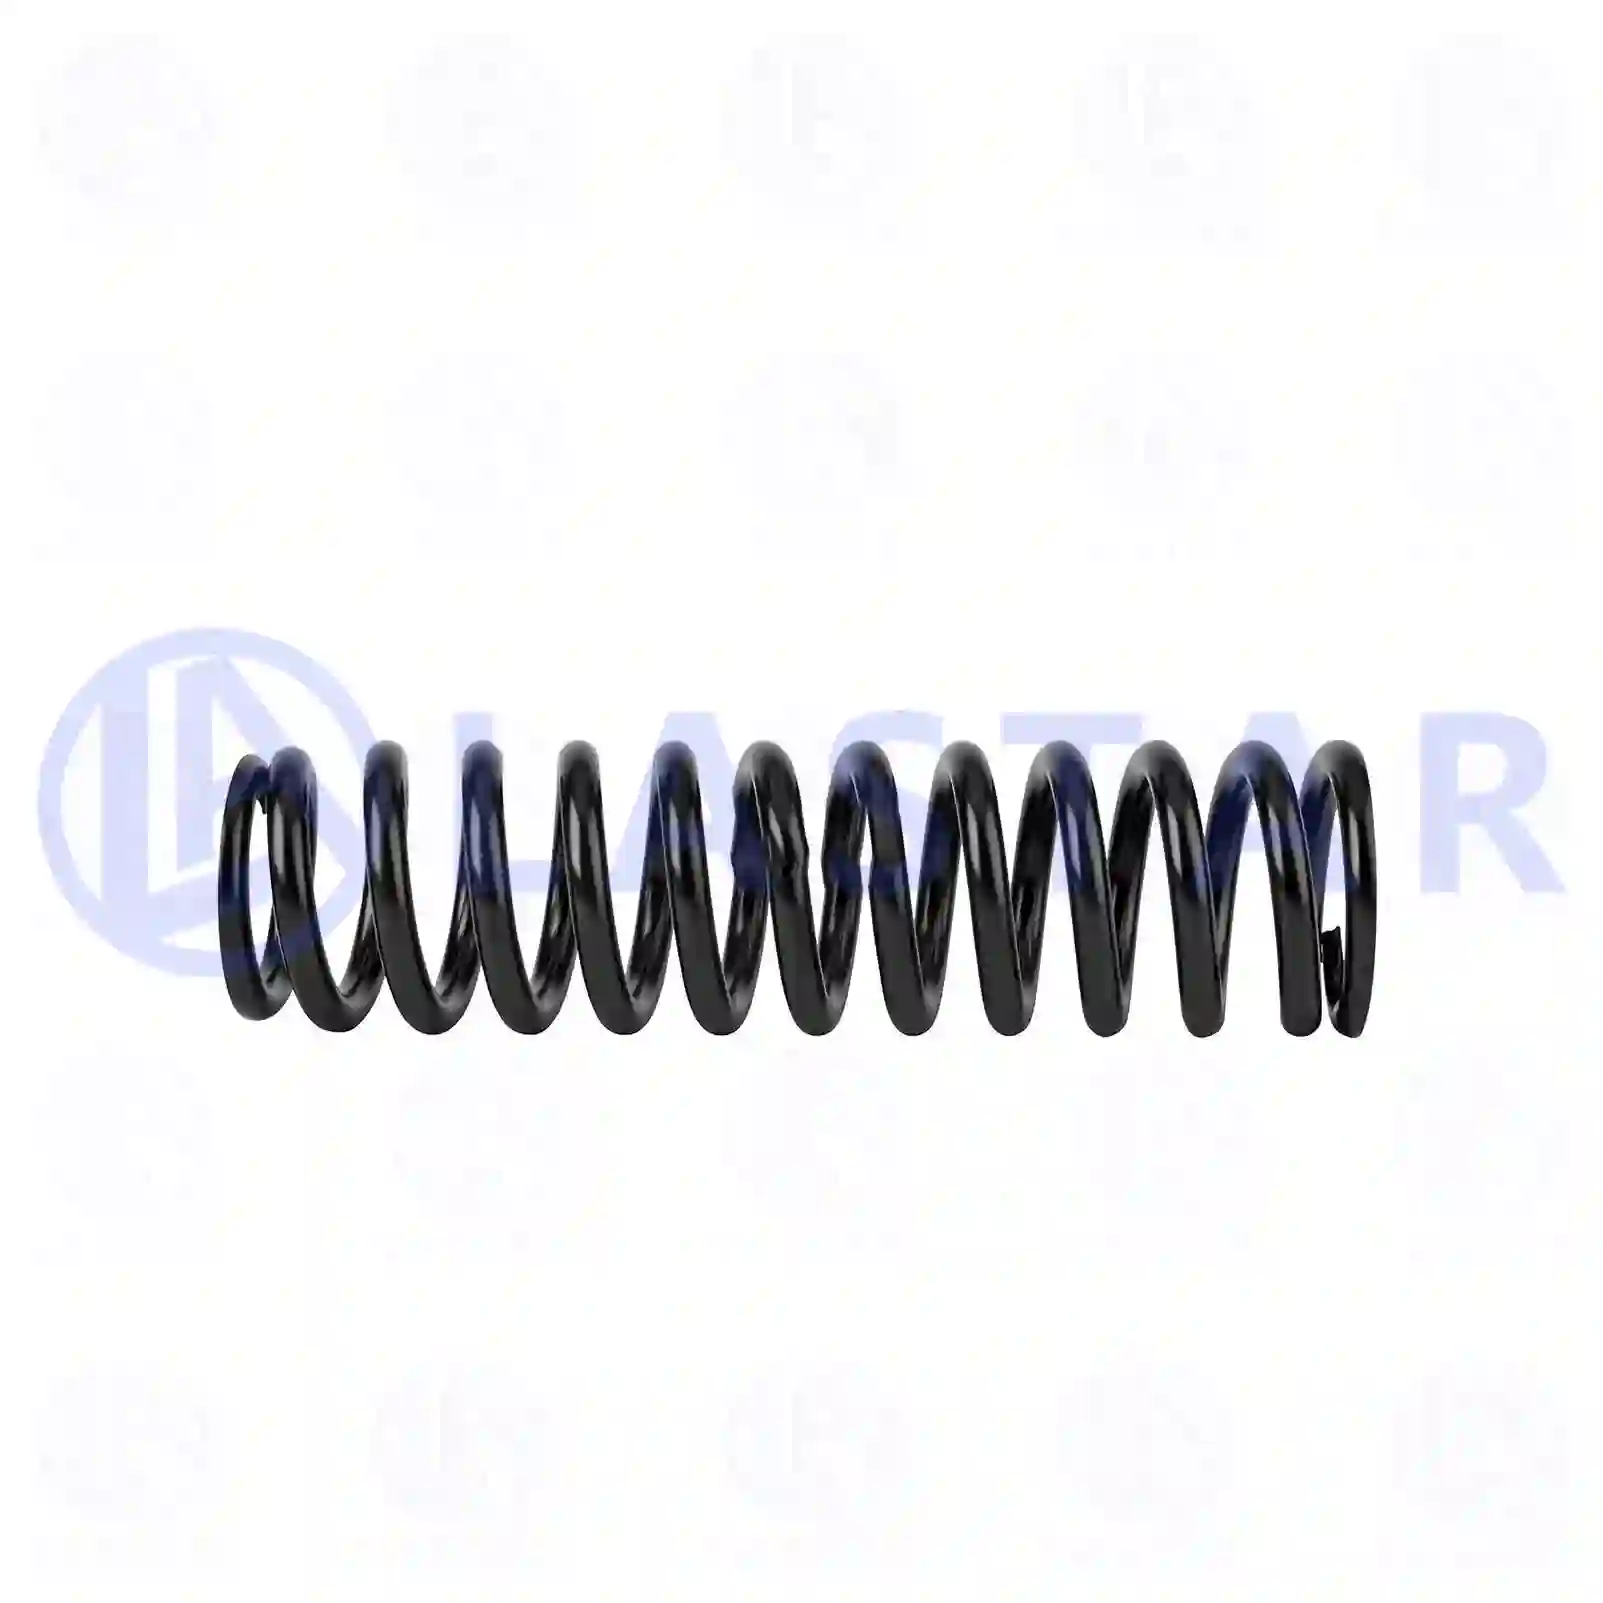 Spring, cabin shock absorber, 77736036, 1466176, , , , , ||  77736036 Lastar Spare Part | Truck Spare Parts, Auotomotive Spare Parts Spring, cabin shock absorber, 77736036, 1466176, , , , , ||  77736036 Lastar Spare Part | Truck Spare Parts, Auotomotive Spare Parts